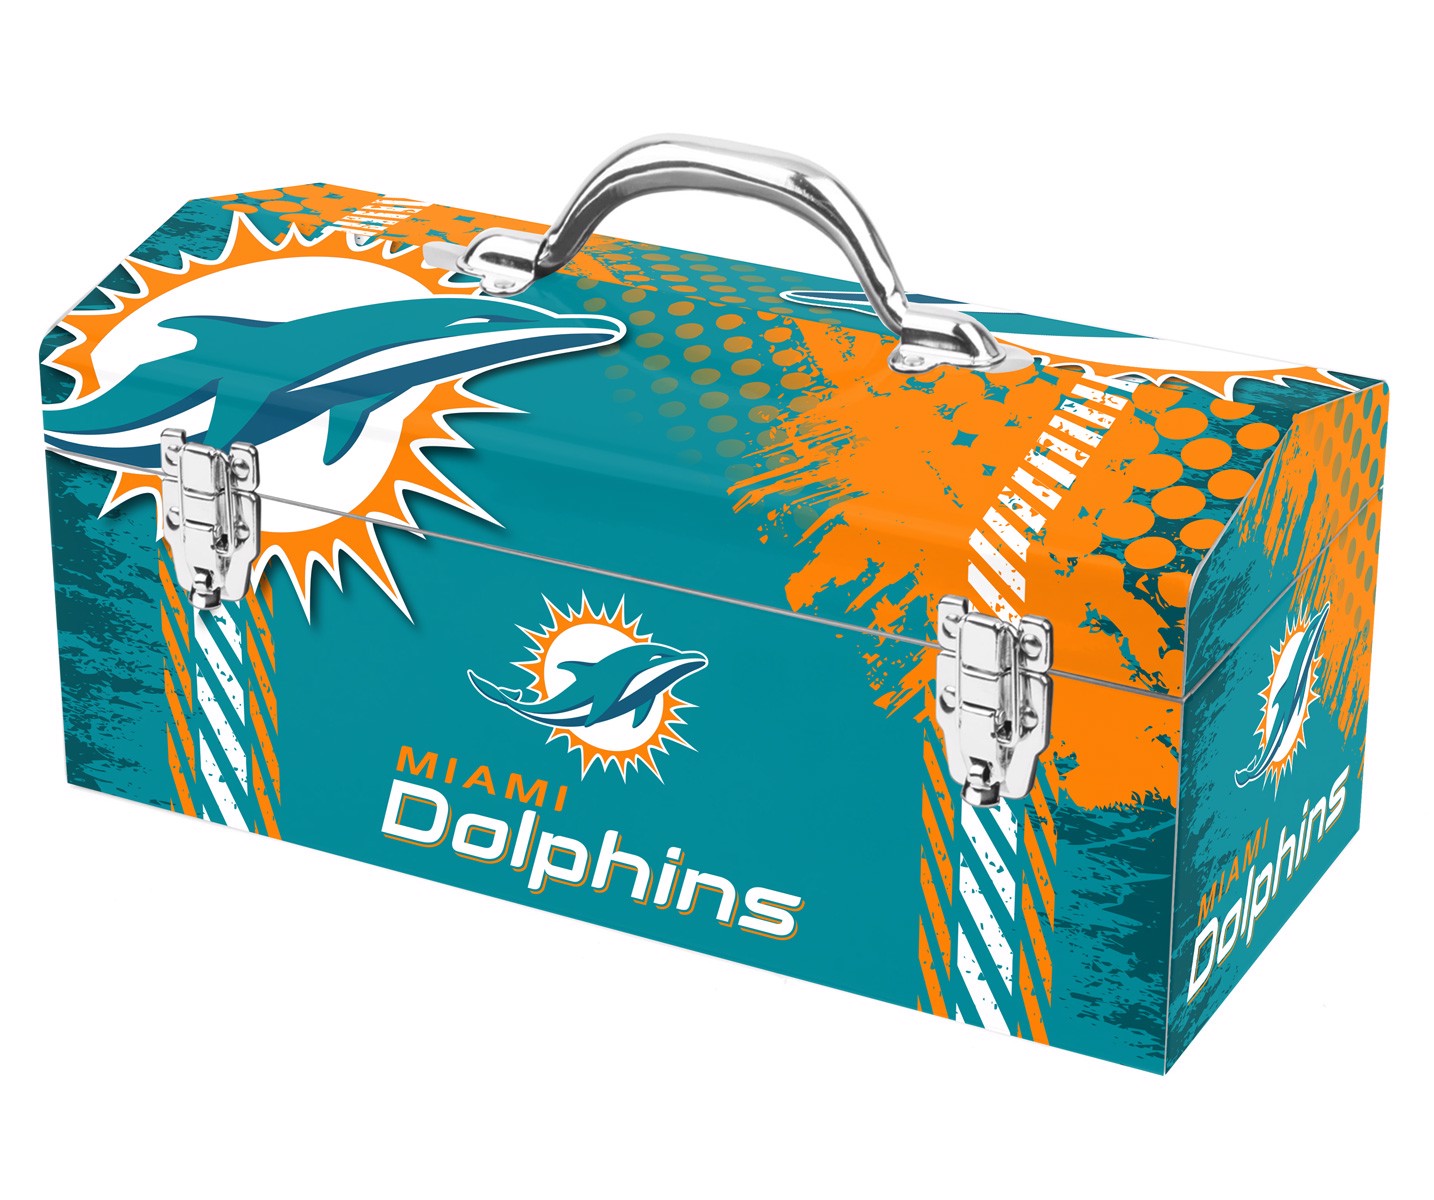 Miami Dolphins Purses Accessories, Dolphins Purses Accessories